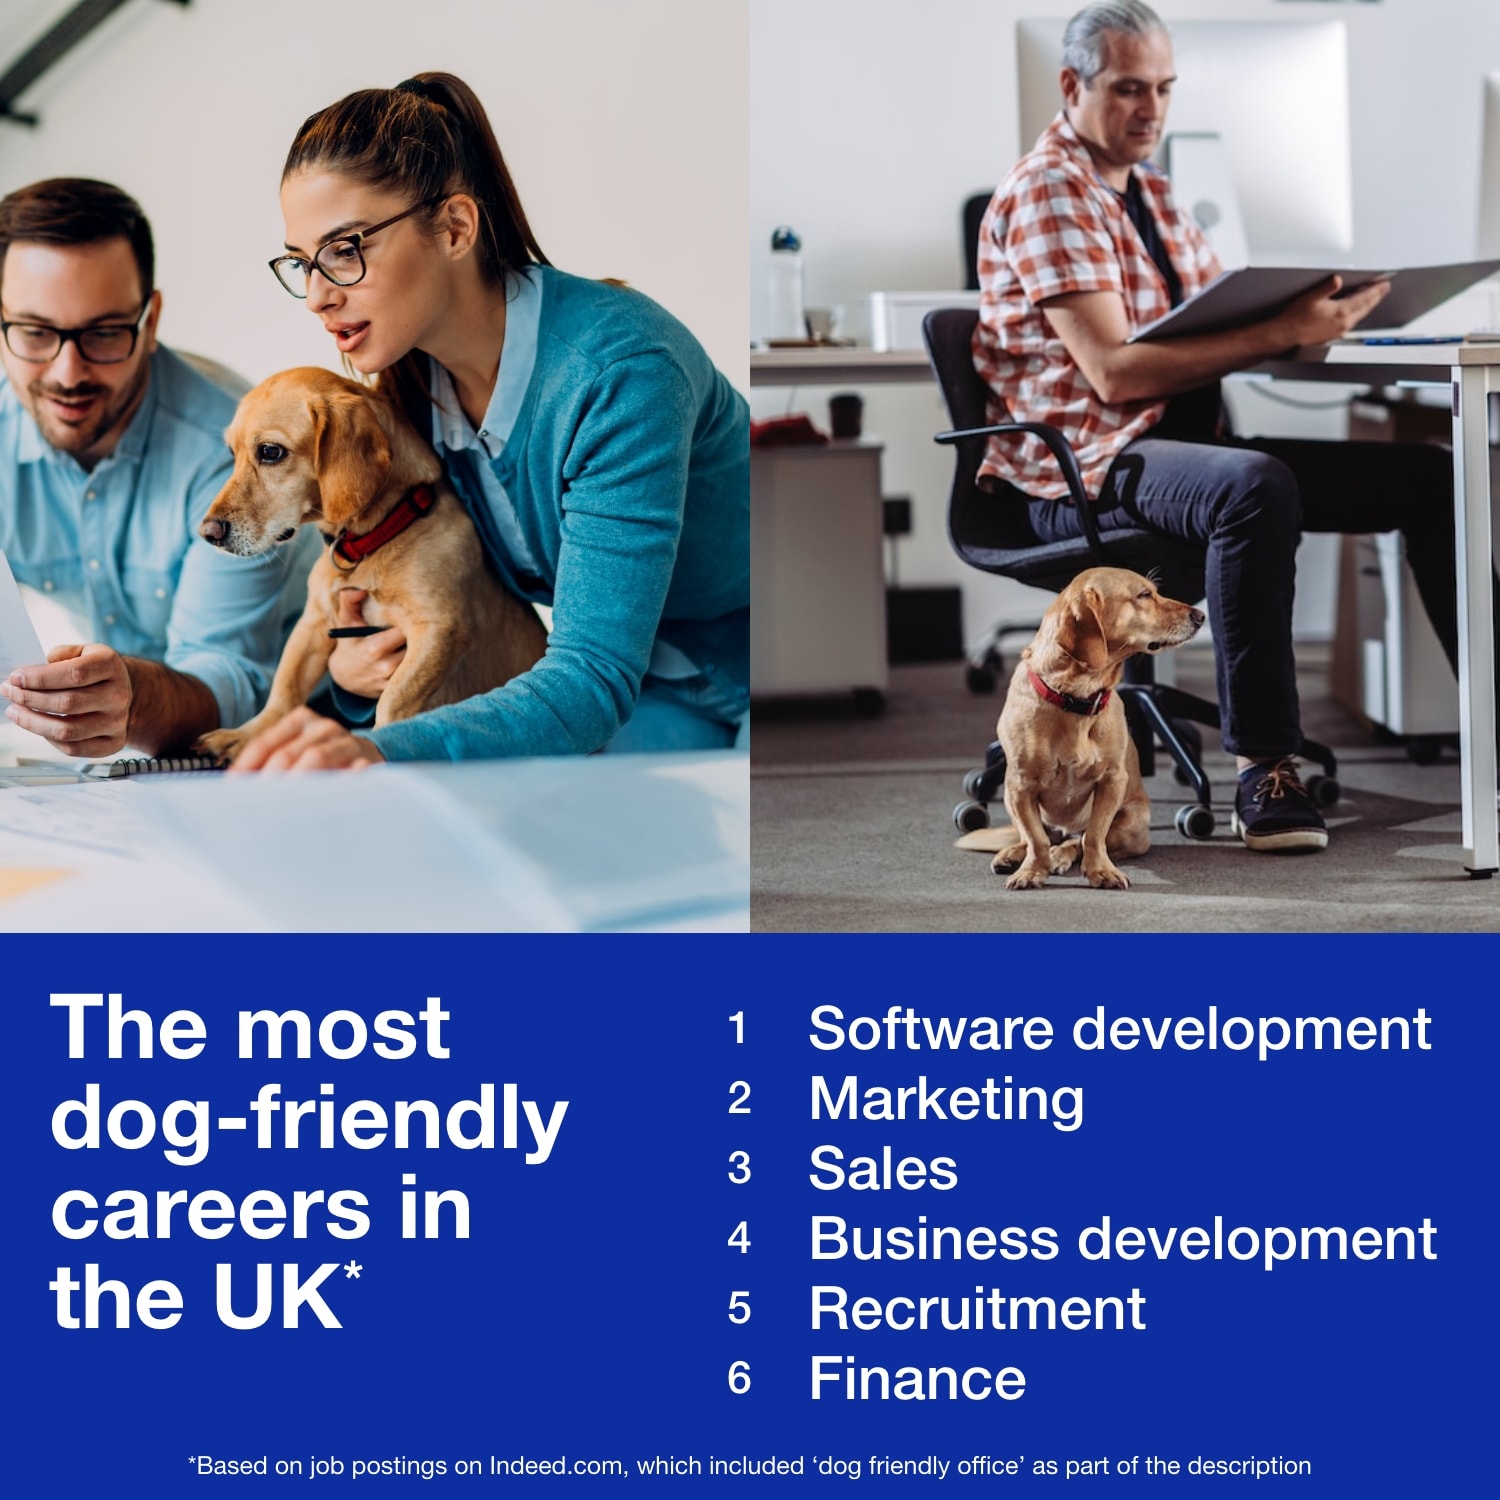 Two images - the first of a man leaning over a work surface with a woman next to him holding a dog, the second of a man working at a desk with a dog by his feet - these represent the most dog-friendly careers in the UK